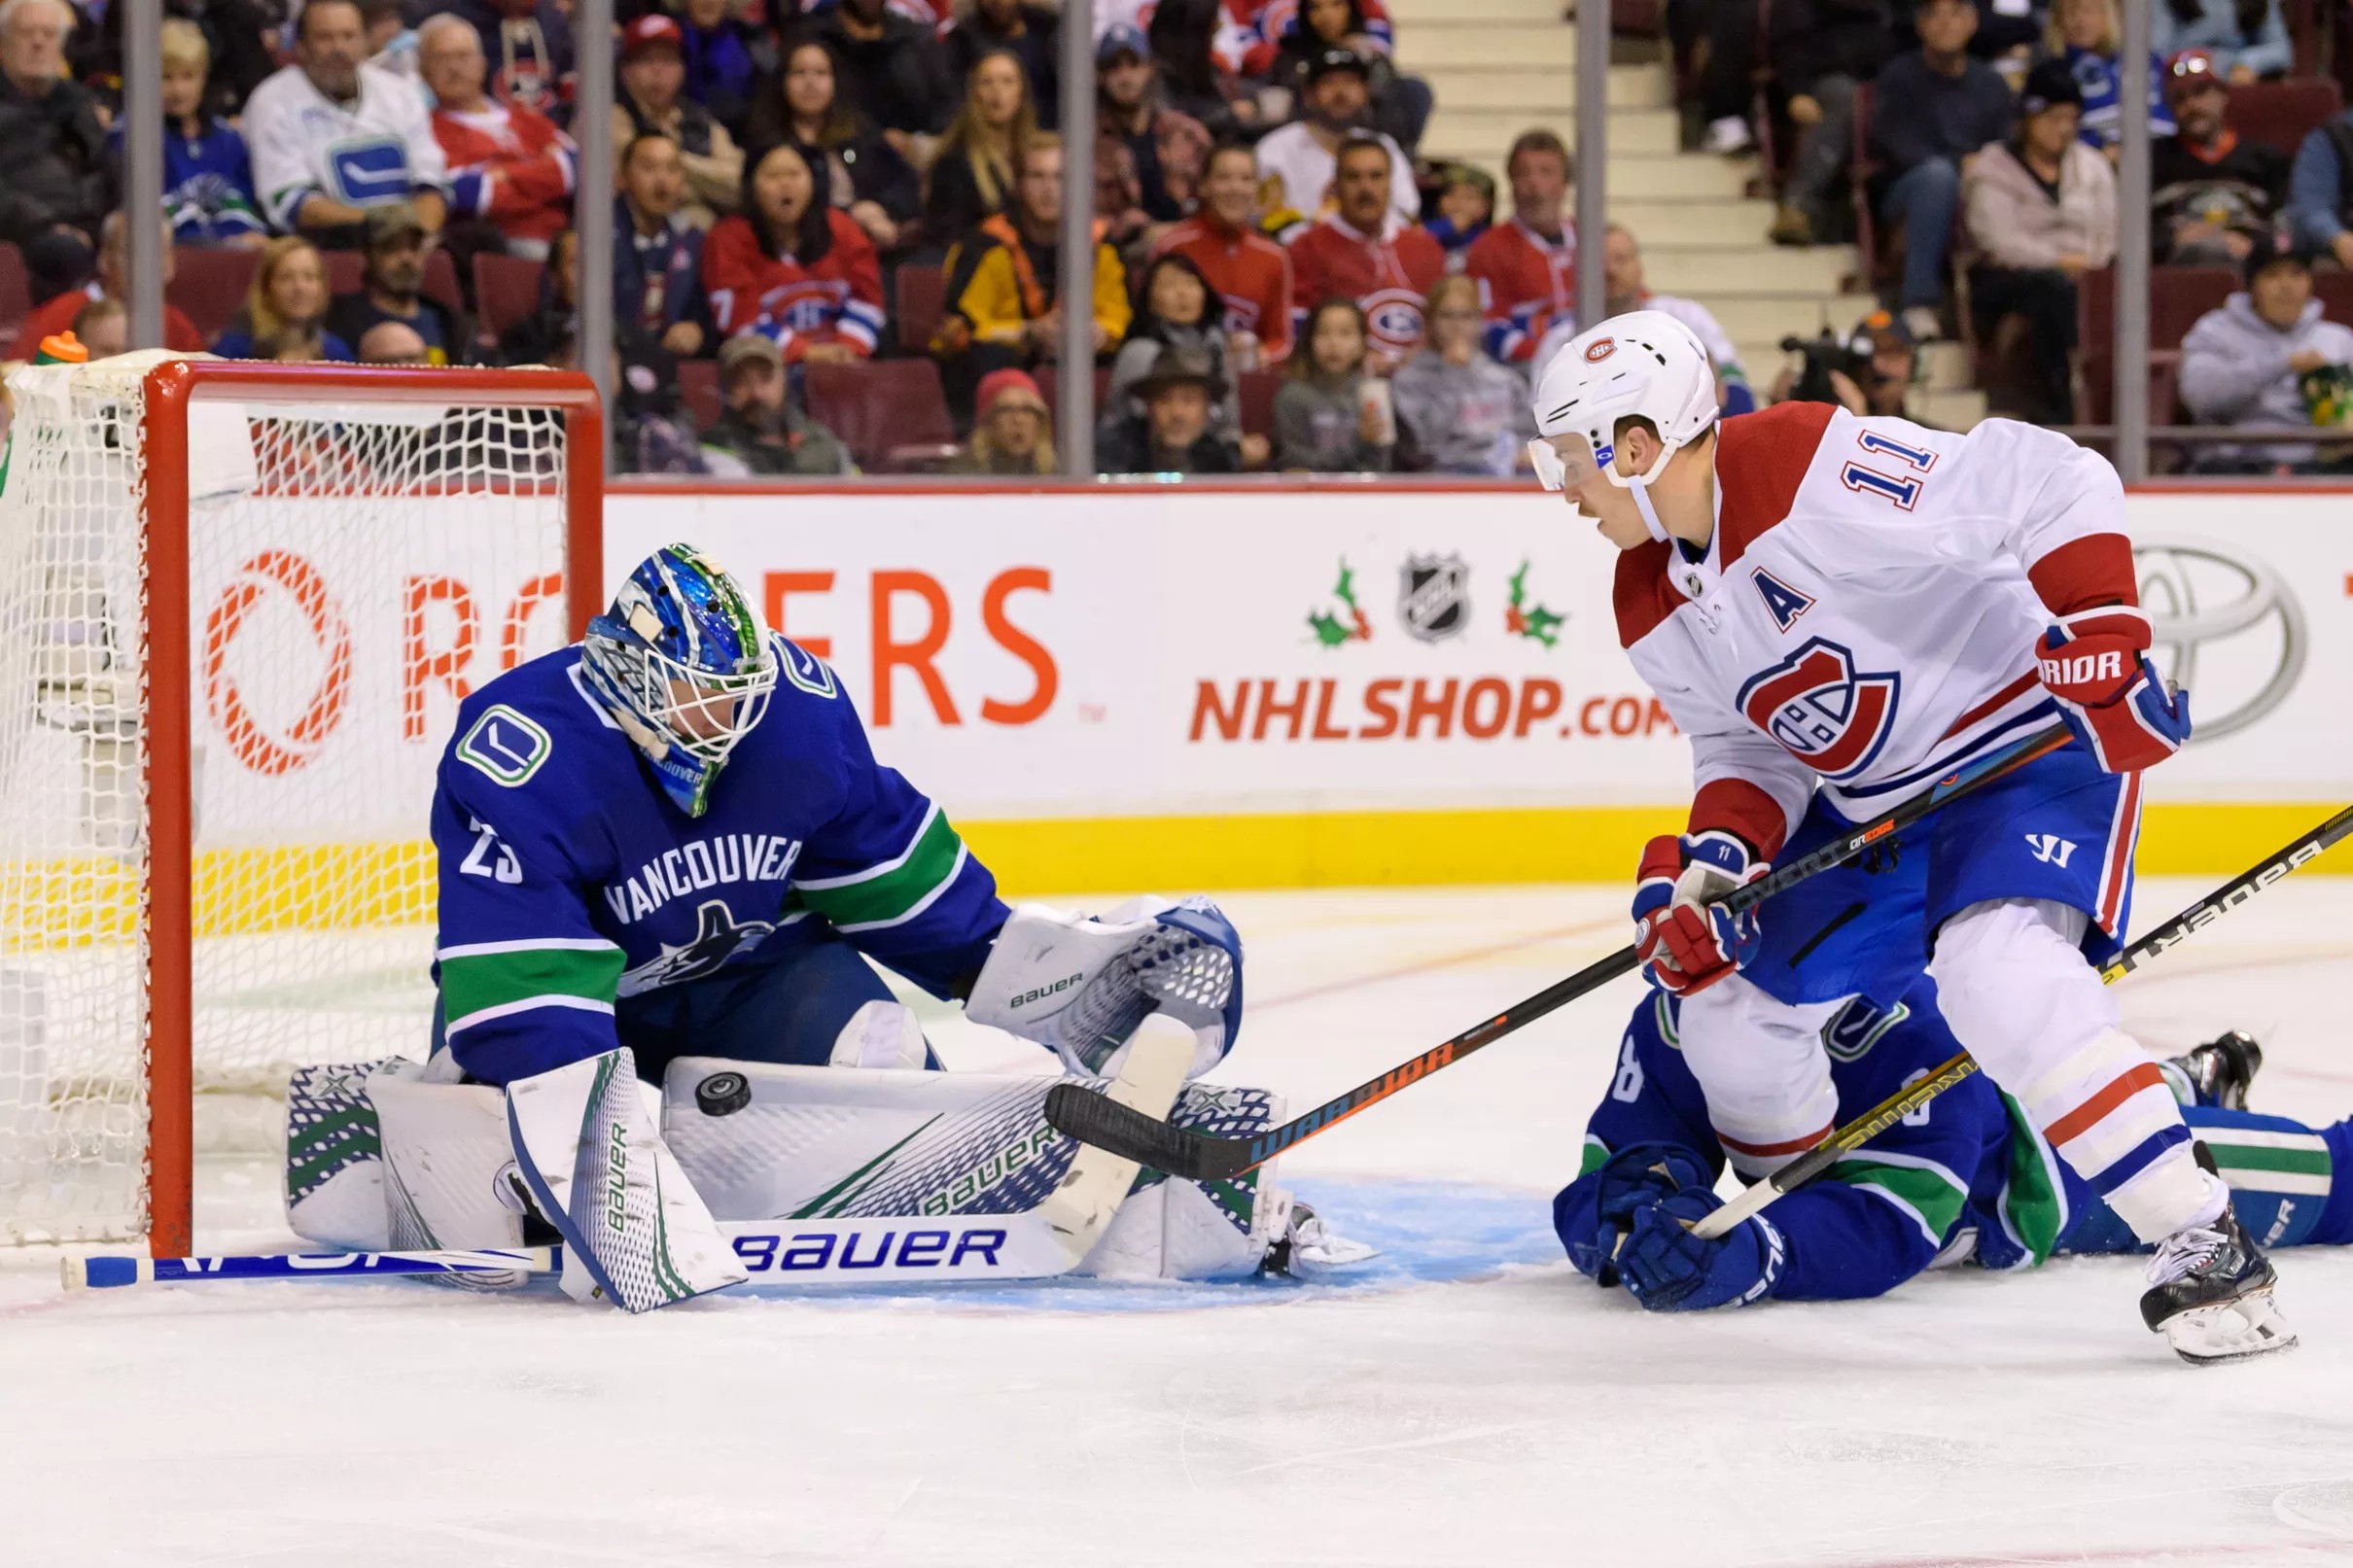 Canadiens Canucks Game preview, start time, Tale of the Tape, and